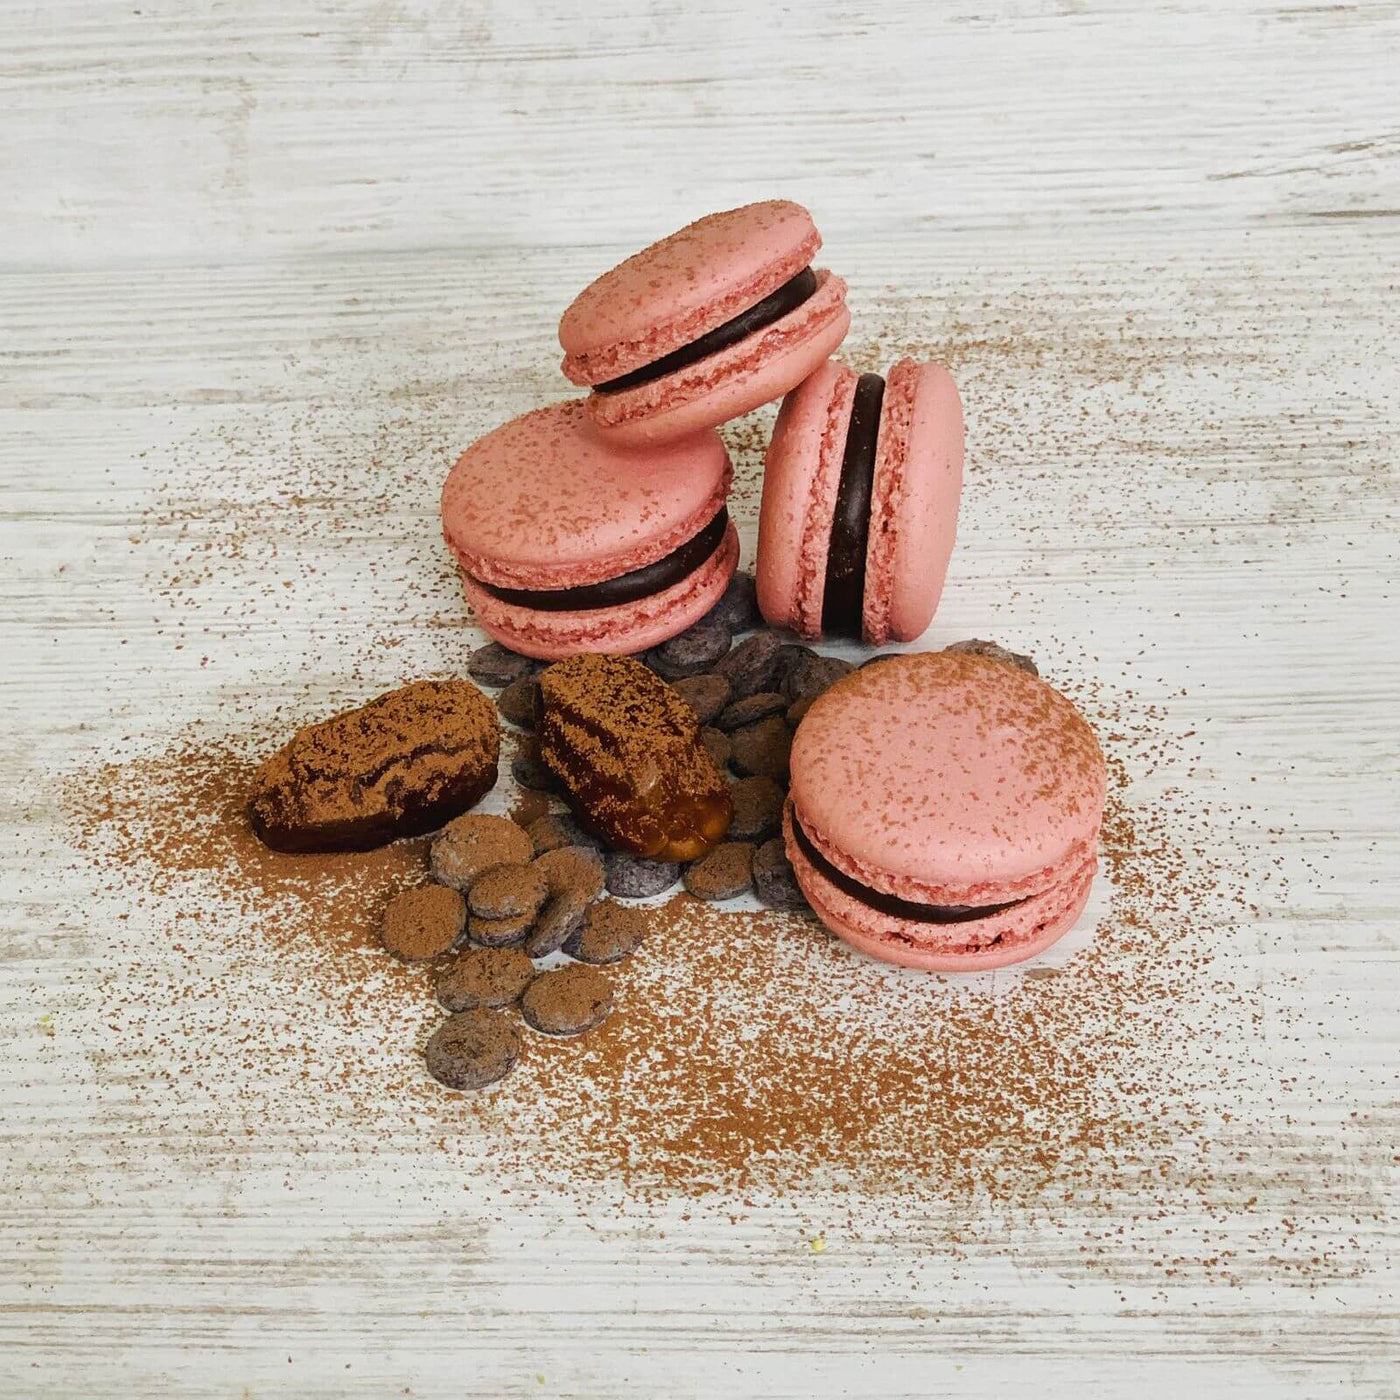 Dates-chocolate-oriental-flavor-macarons-DodoMarket-delivery-Mauritius